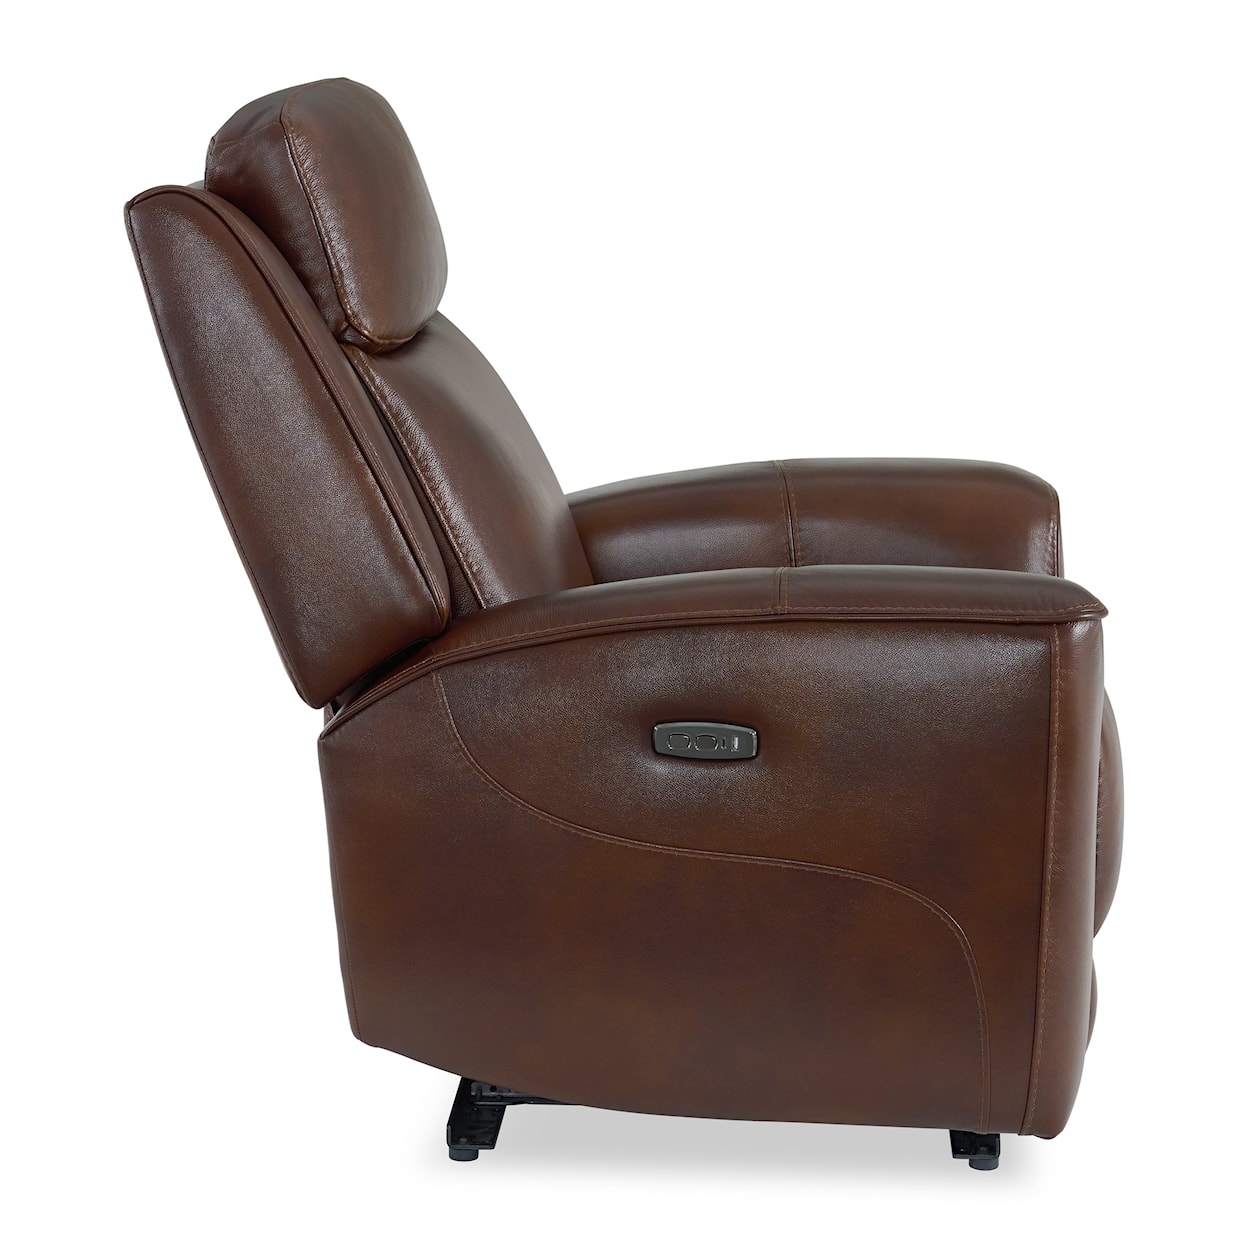 Kuka Home KMT6150 P2 Leather Recliner